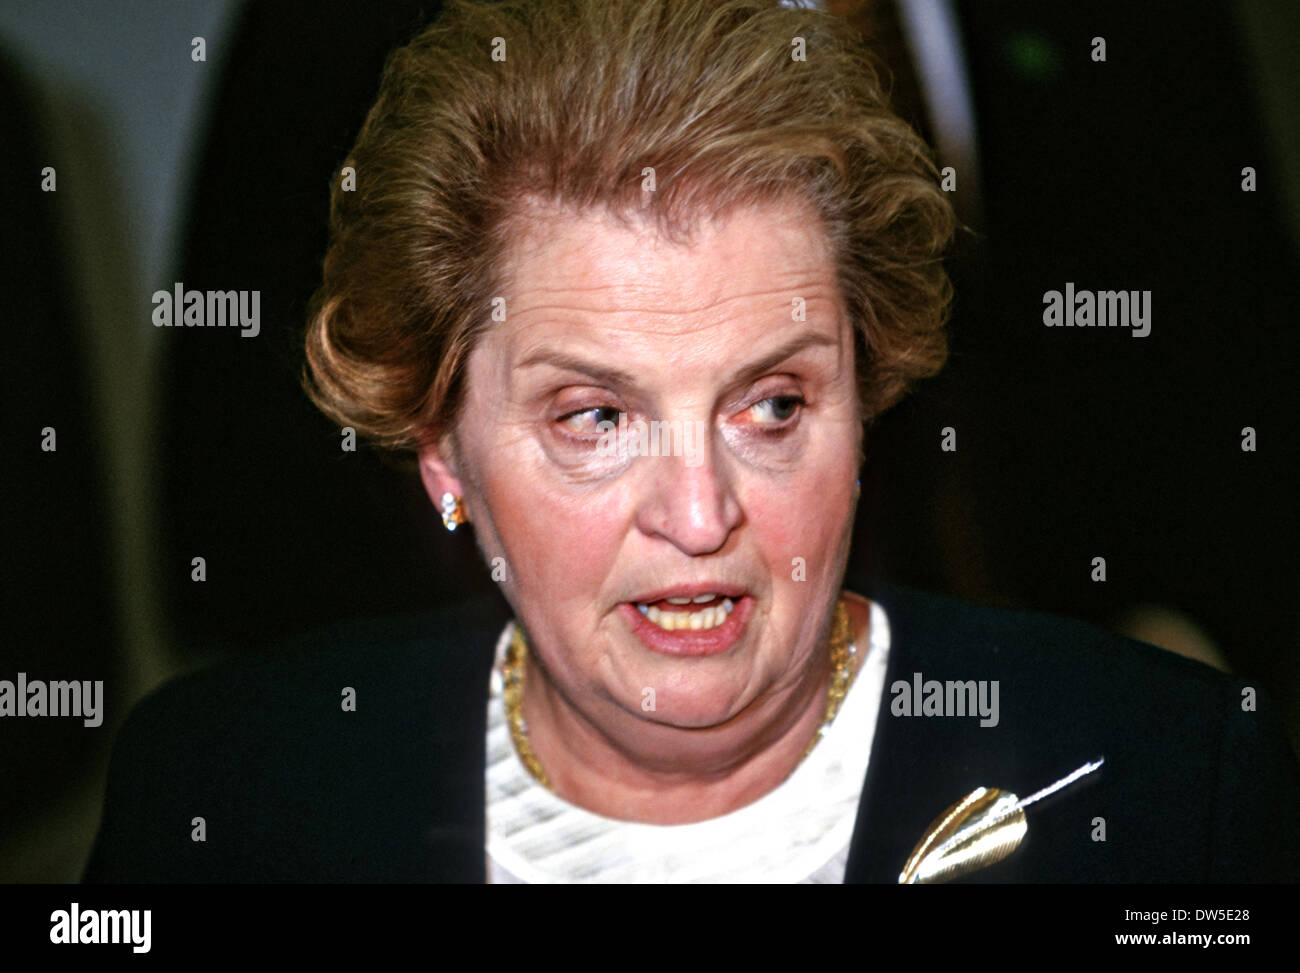 Secretary of State Madeleine Albright during an event at the White House February 25, 1998 in Washington, DC. Stock Photo